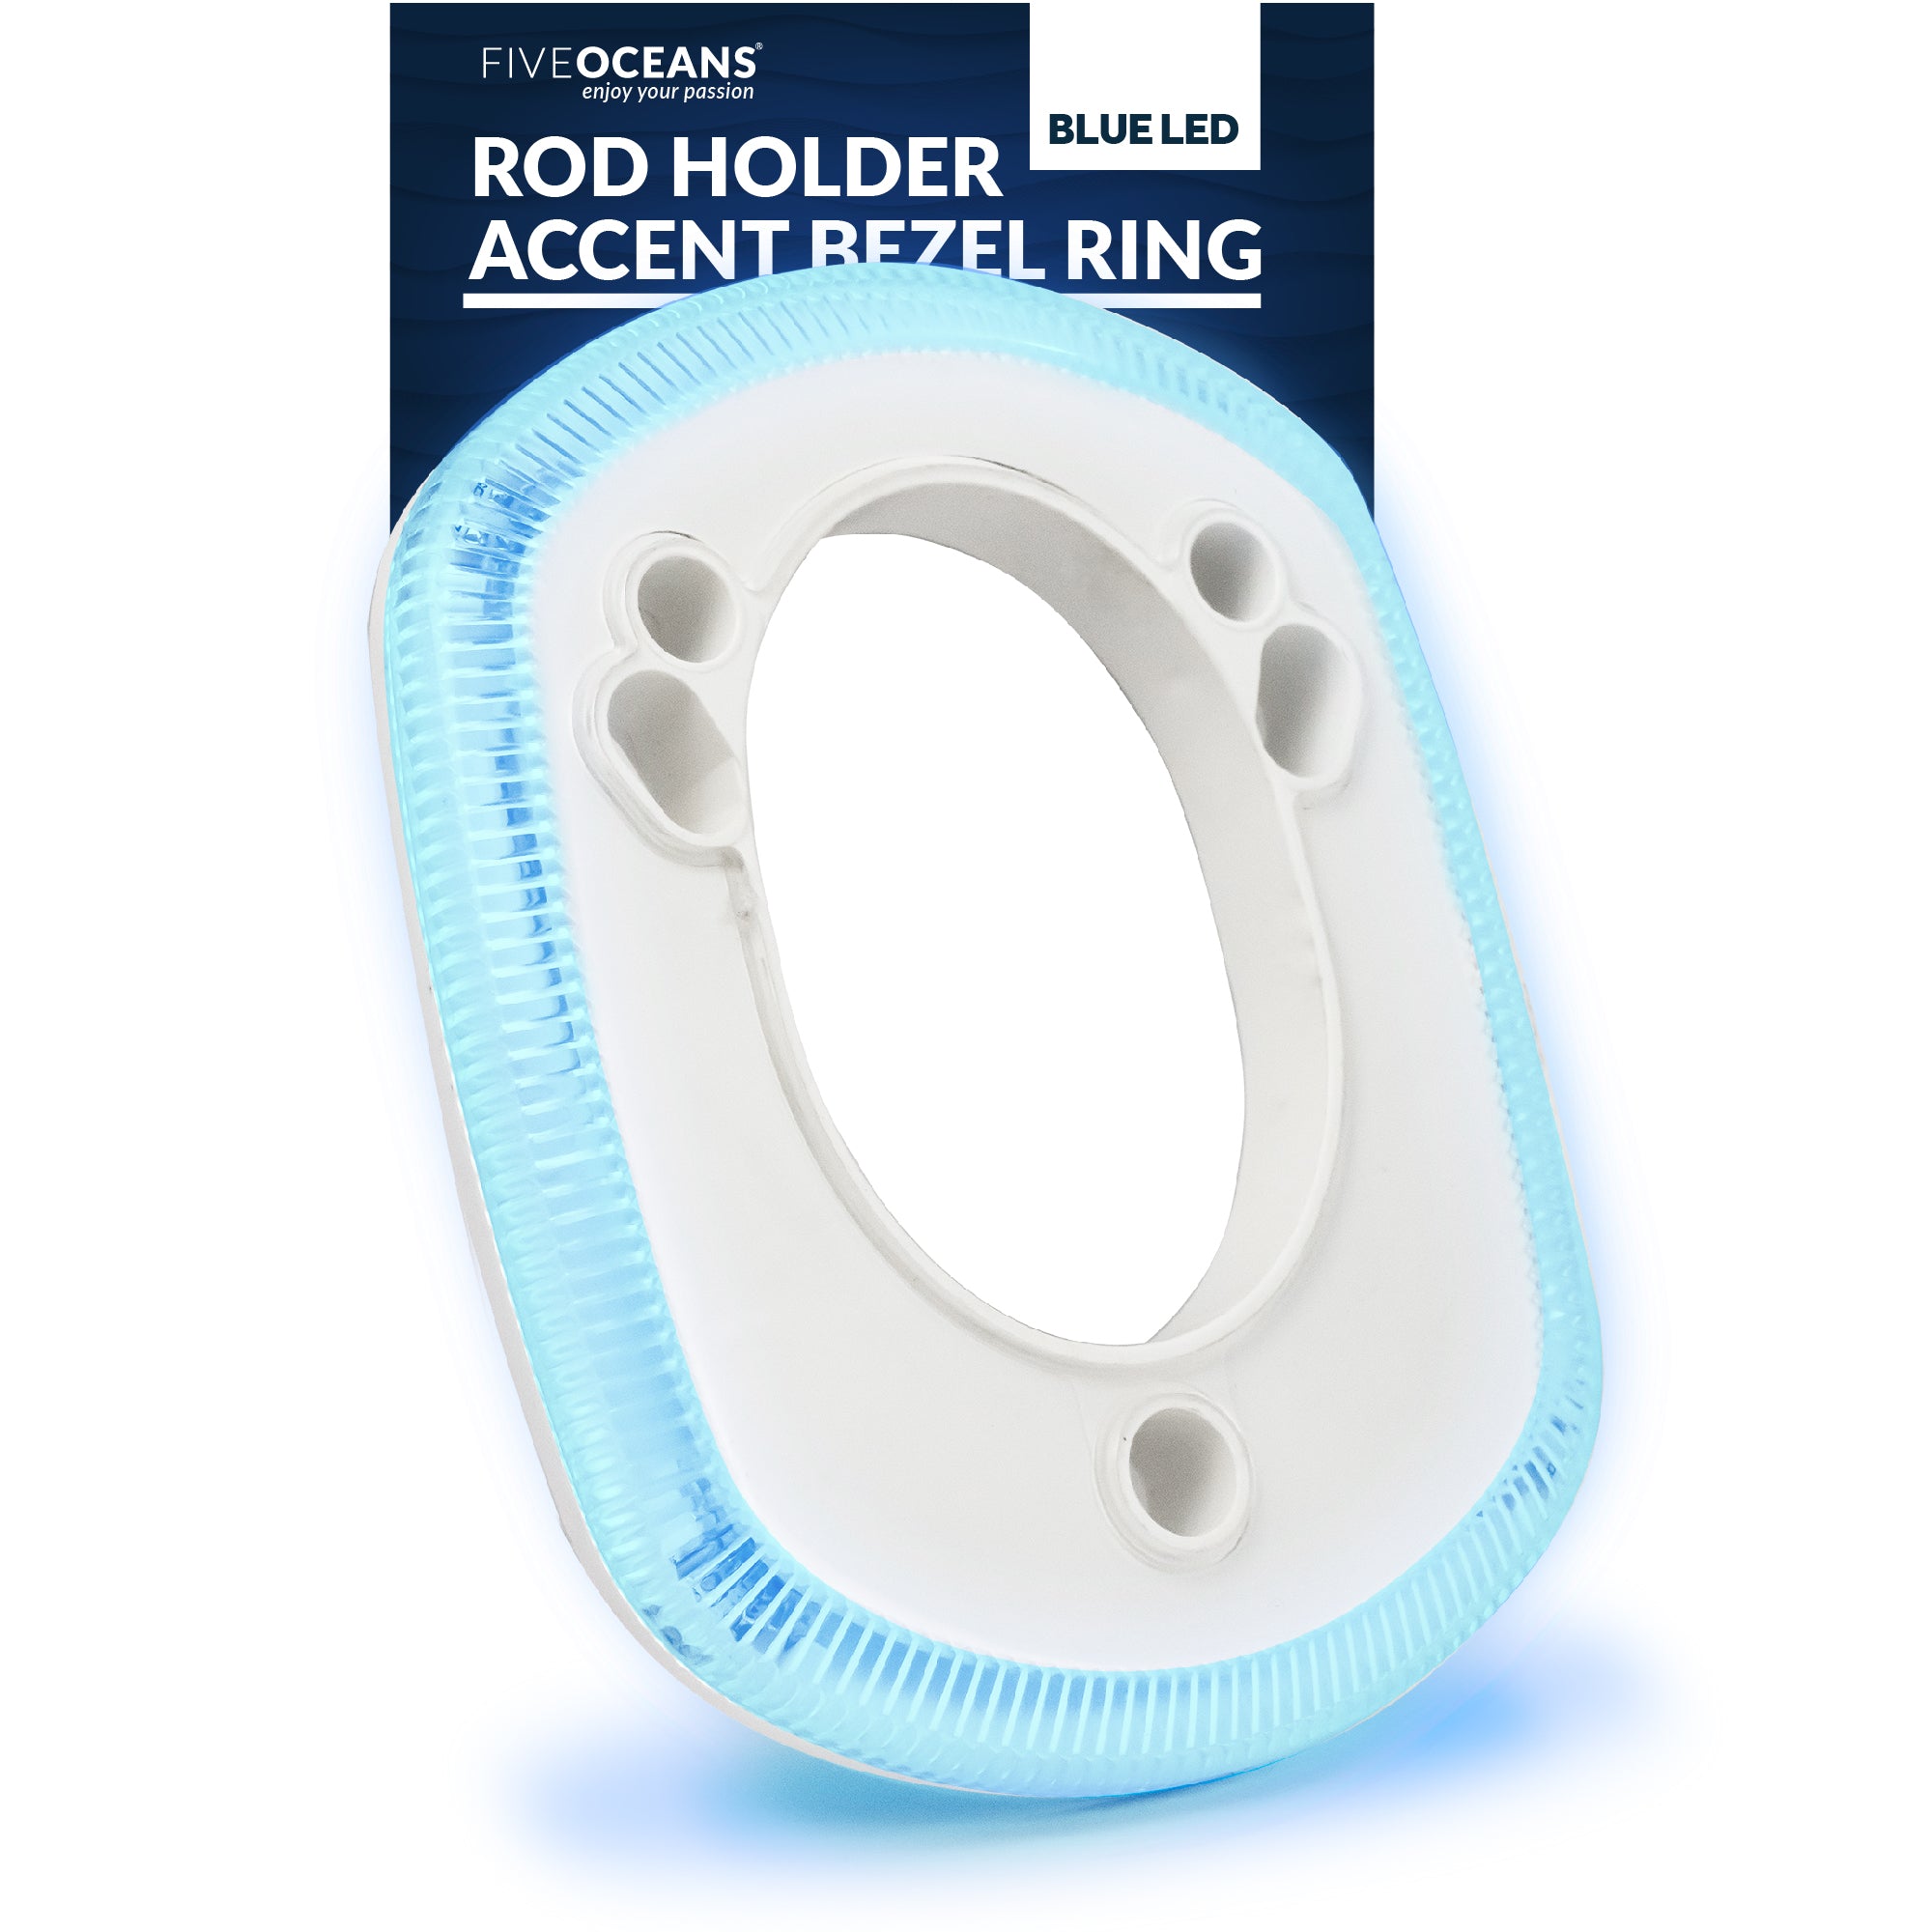 Blue LED Rod Holder Accent Bezel Ring, Fits All Five Oceans and Most Standard Rod Holders, Made of Grade Marine Durable Materials, 12 Volts, FO-4433